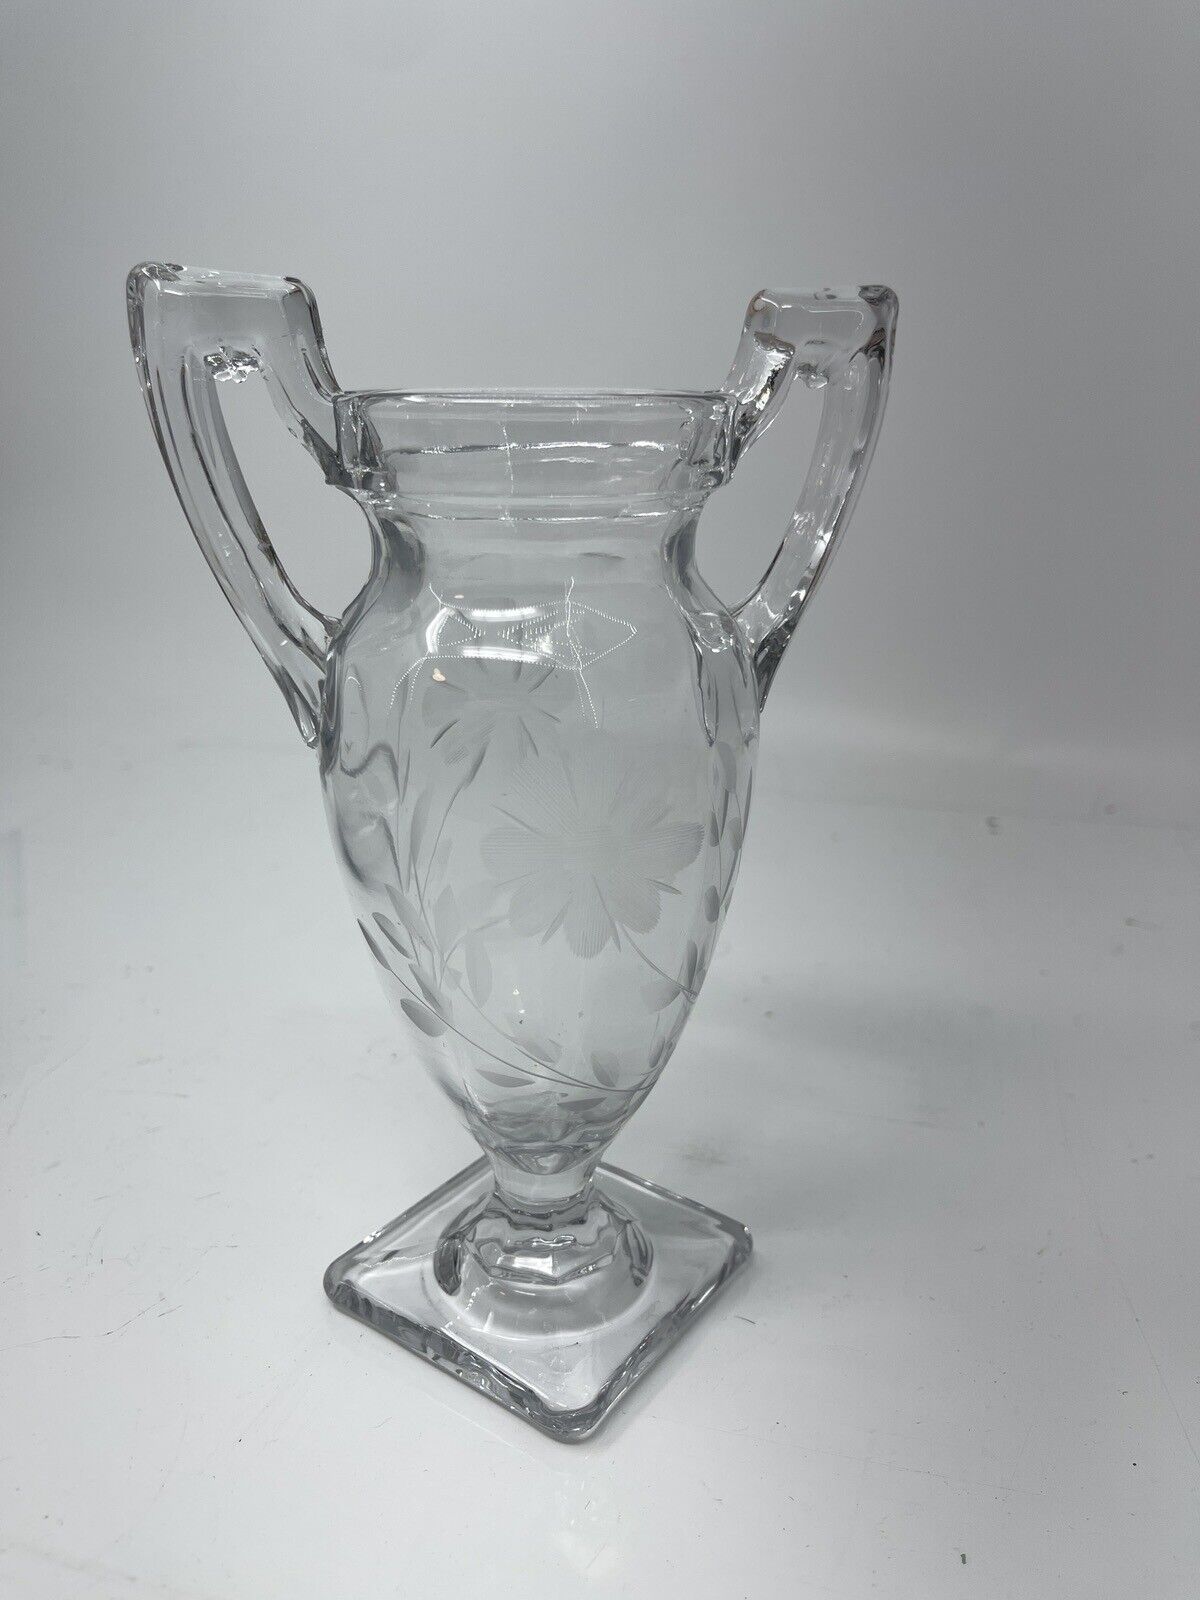 Vintage Glass Urn Heisey? Small 6.5 in tall Vase Loving Cup Early American Glass